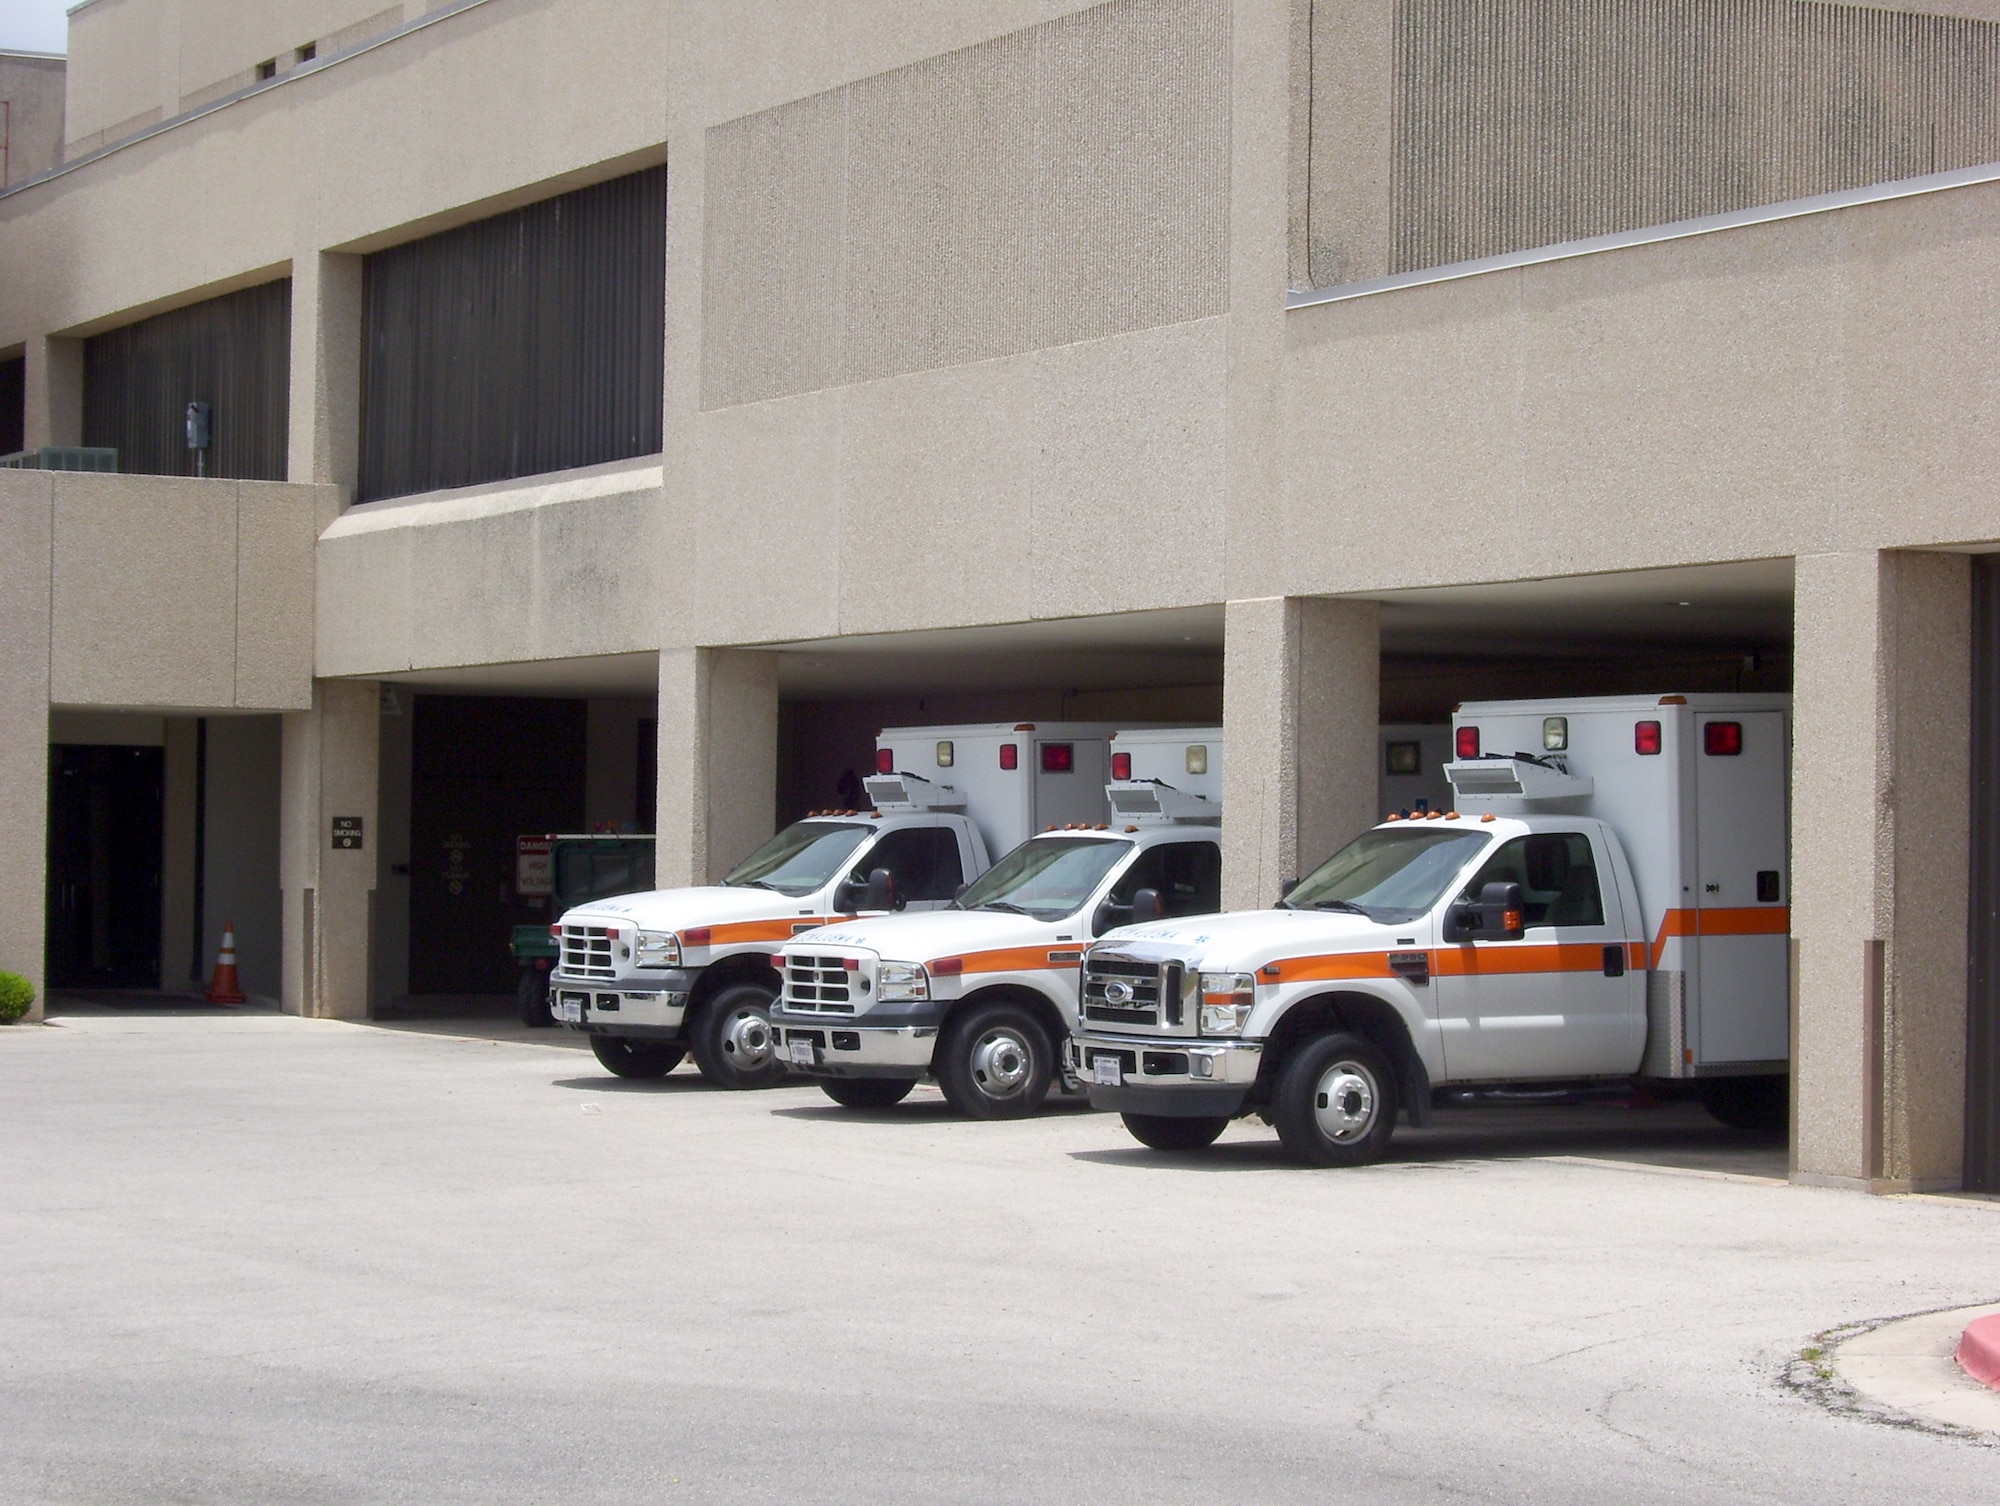 Ambulances are parked outside the emergency room at Wilford Hall Medical Center, San Antonio. Beginning July 1, 2010, Wilford Hall Medical Center will discontinue trauma services. All severely injured trauma patients from San Antonio, Bexar County and surrounding counties, and South Texas, will go to nearby Brooke Army Medical Center or University Hospital in San Antonio, the other two leading trauma centers serving the region. (Courtesy photo/Linda Frost)